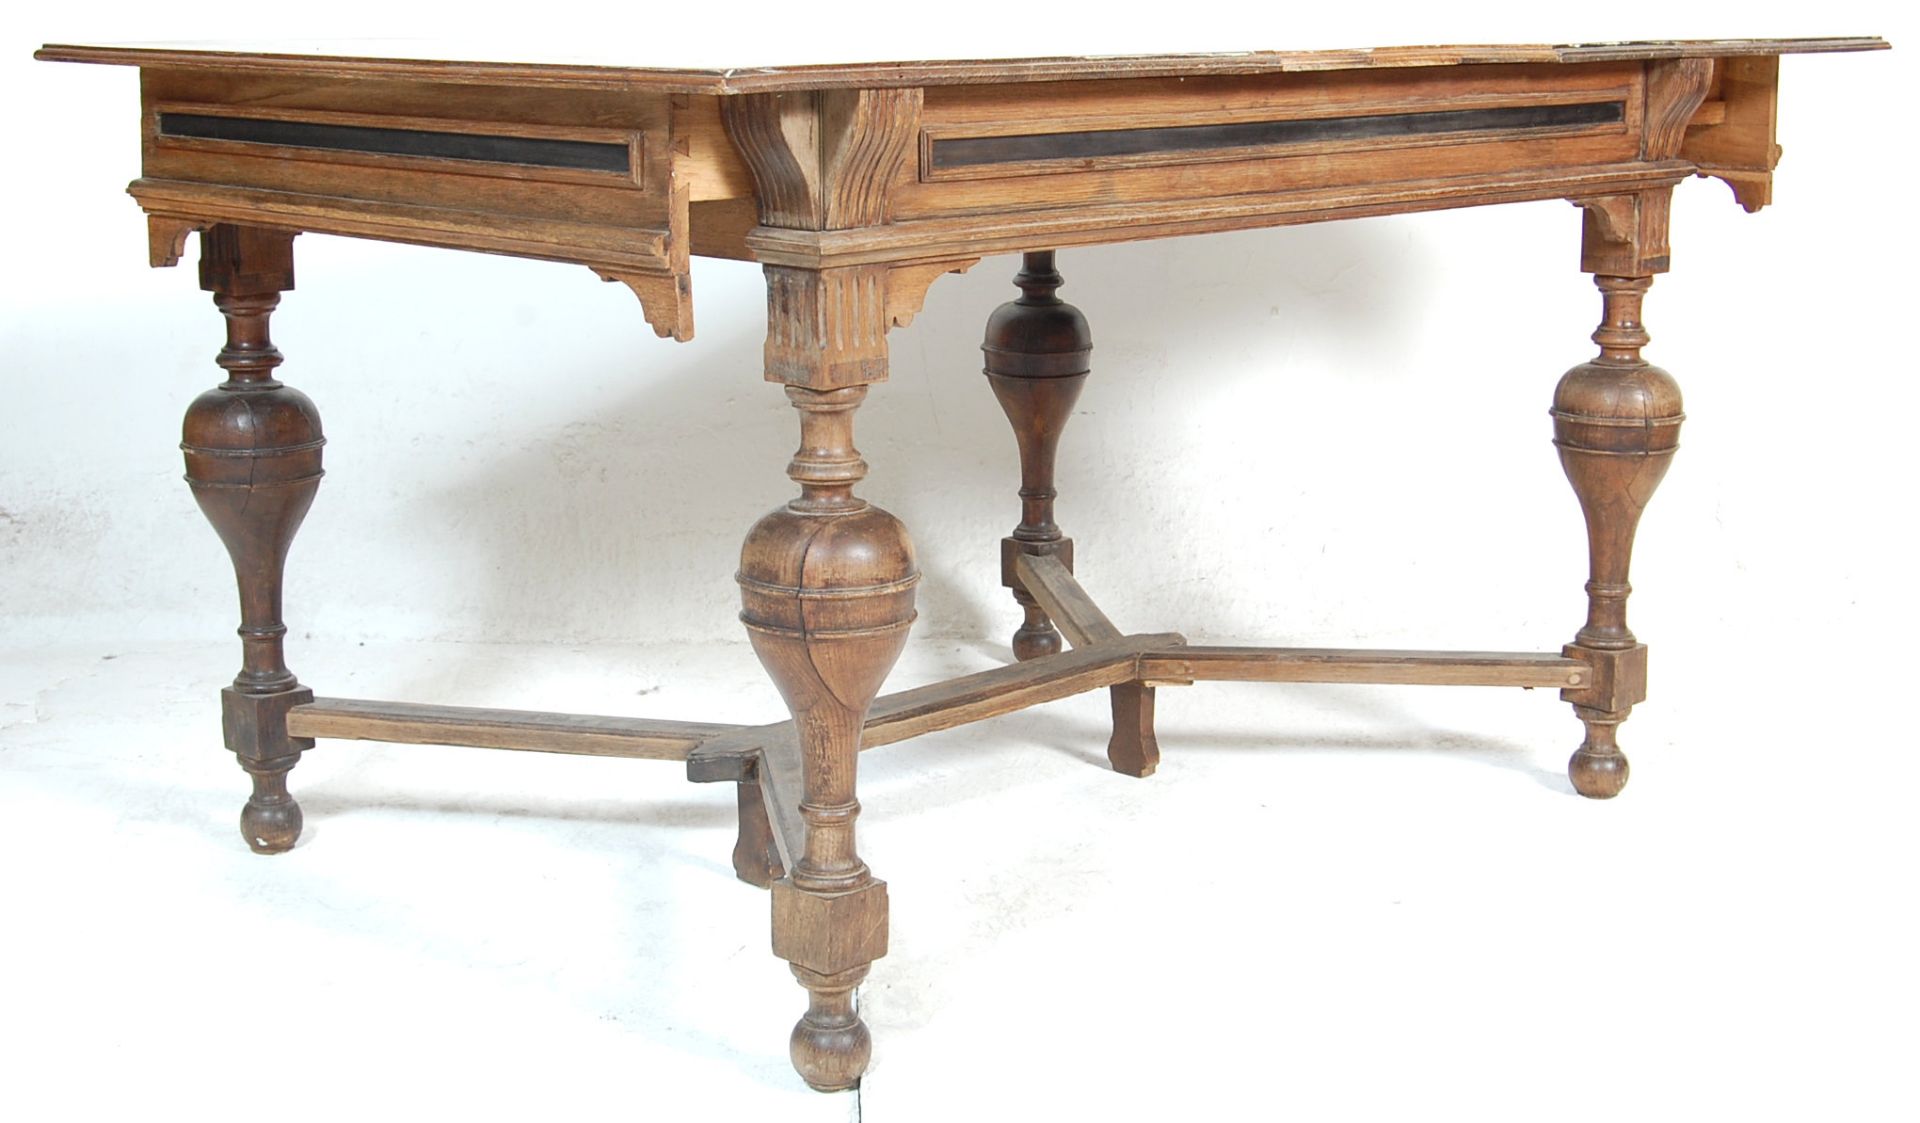 A 19th century Victorian French provincial oak extendable dining table. The table having cup and